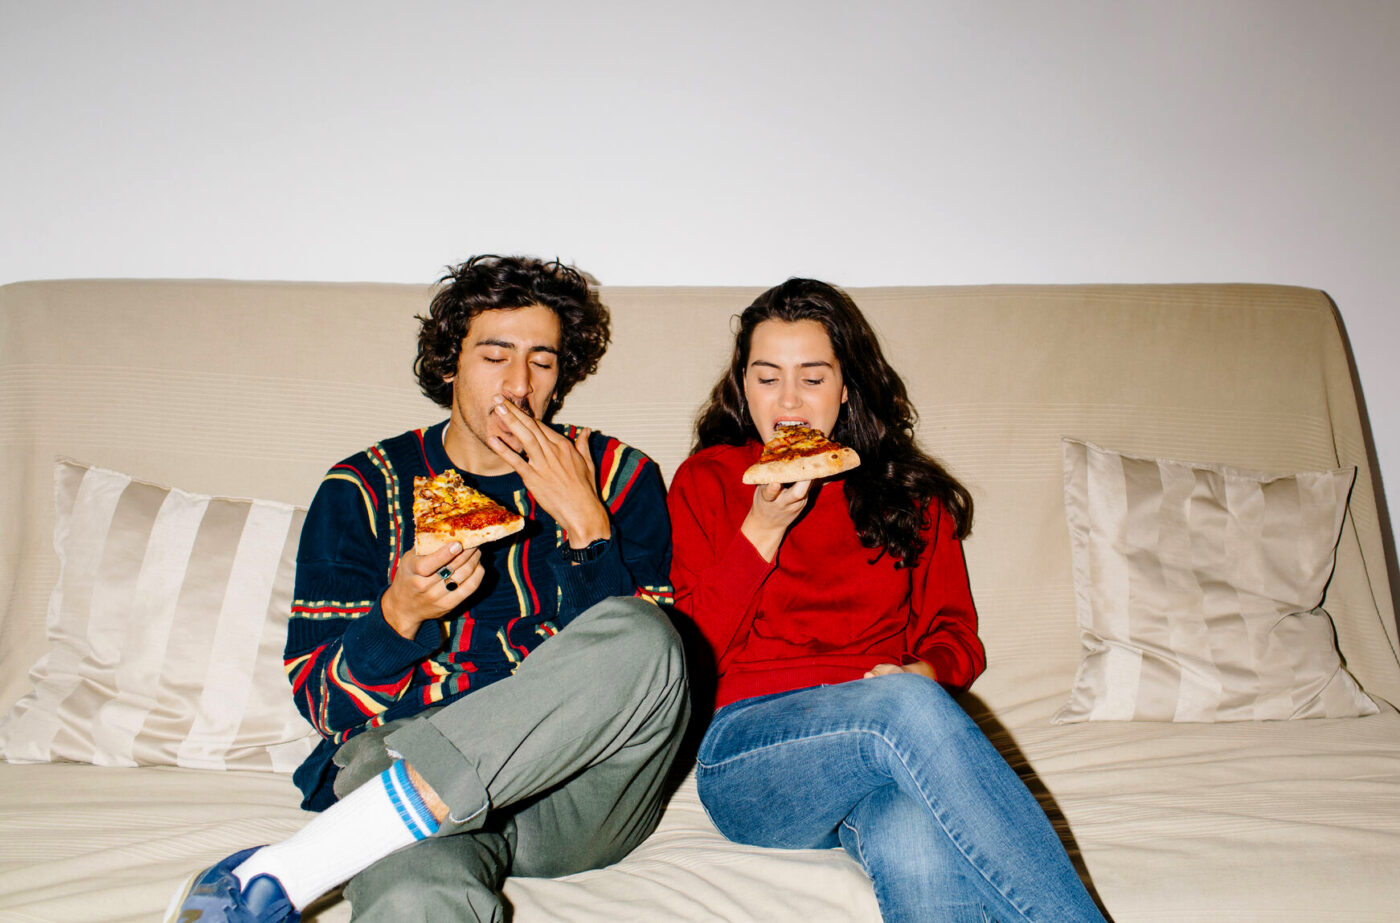 Gen Zers sitting on sofa at home and enjoying pizza.